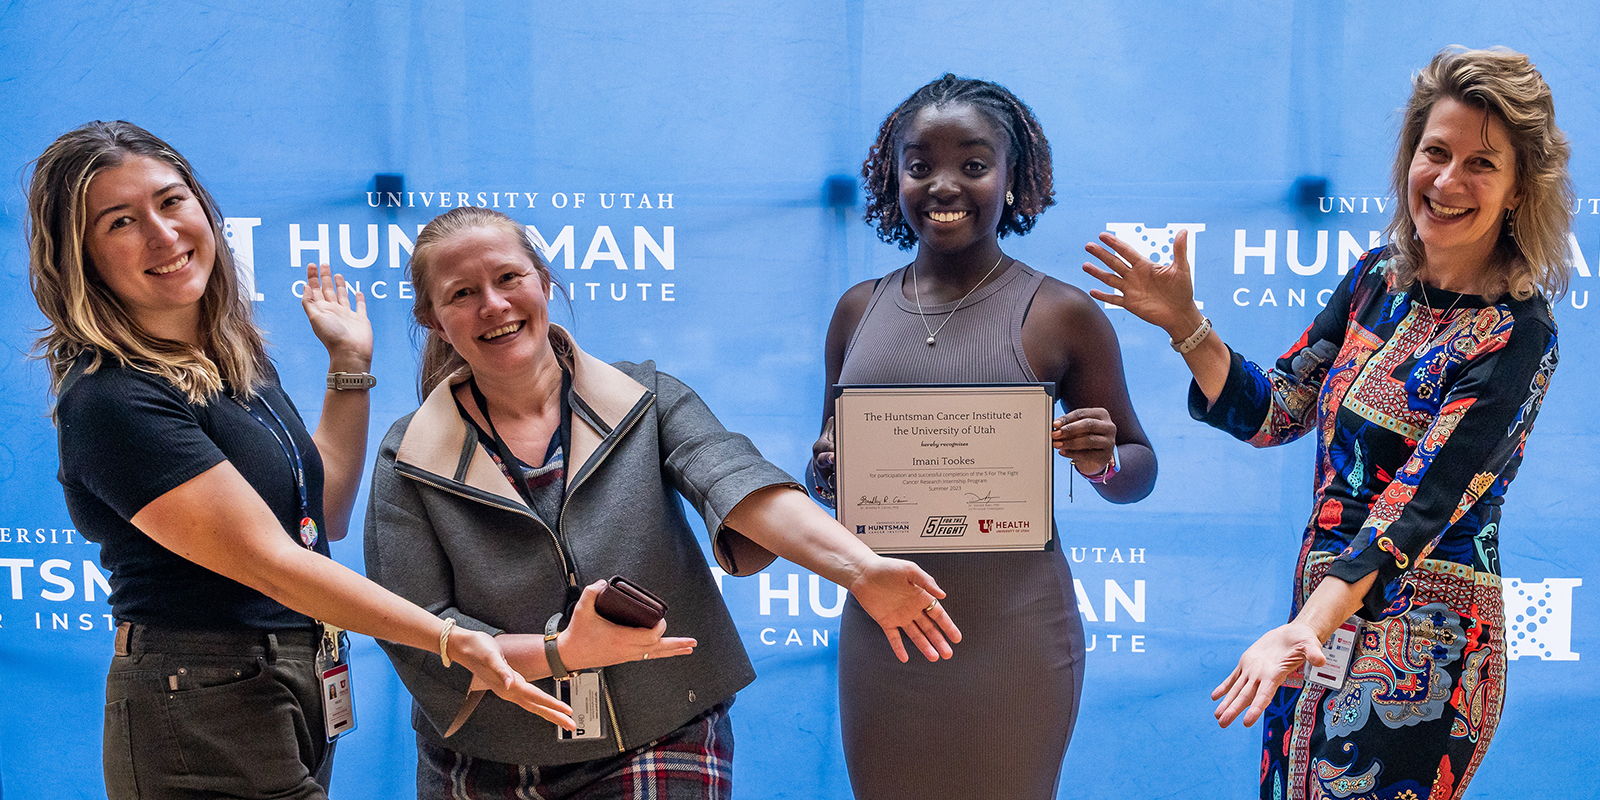 Ulrich Group members standing in front of a step and repeat backdrop and gesturing towards Imani Tookes, who is holding up a certificate of completion of the 5 For The Fight Cancer Research Internship program.